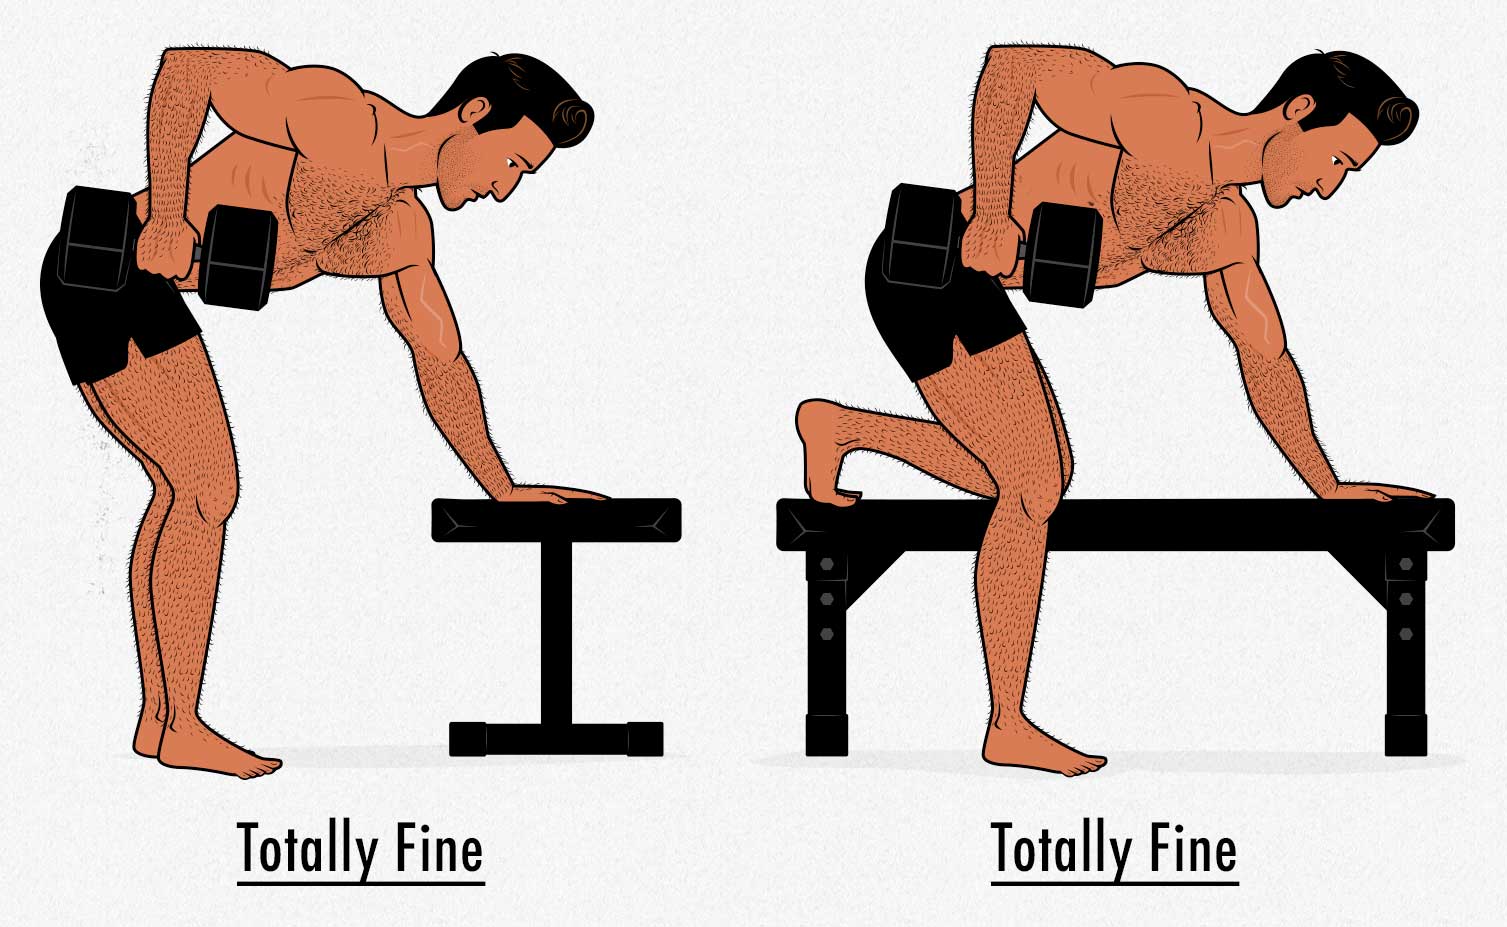 Illustration comparing the one-arm dumbbell row with a knee up on the bench versus both feet on the ground.